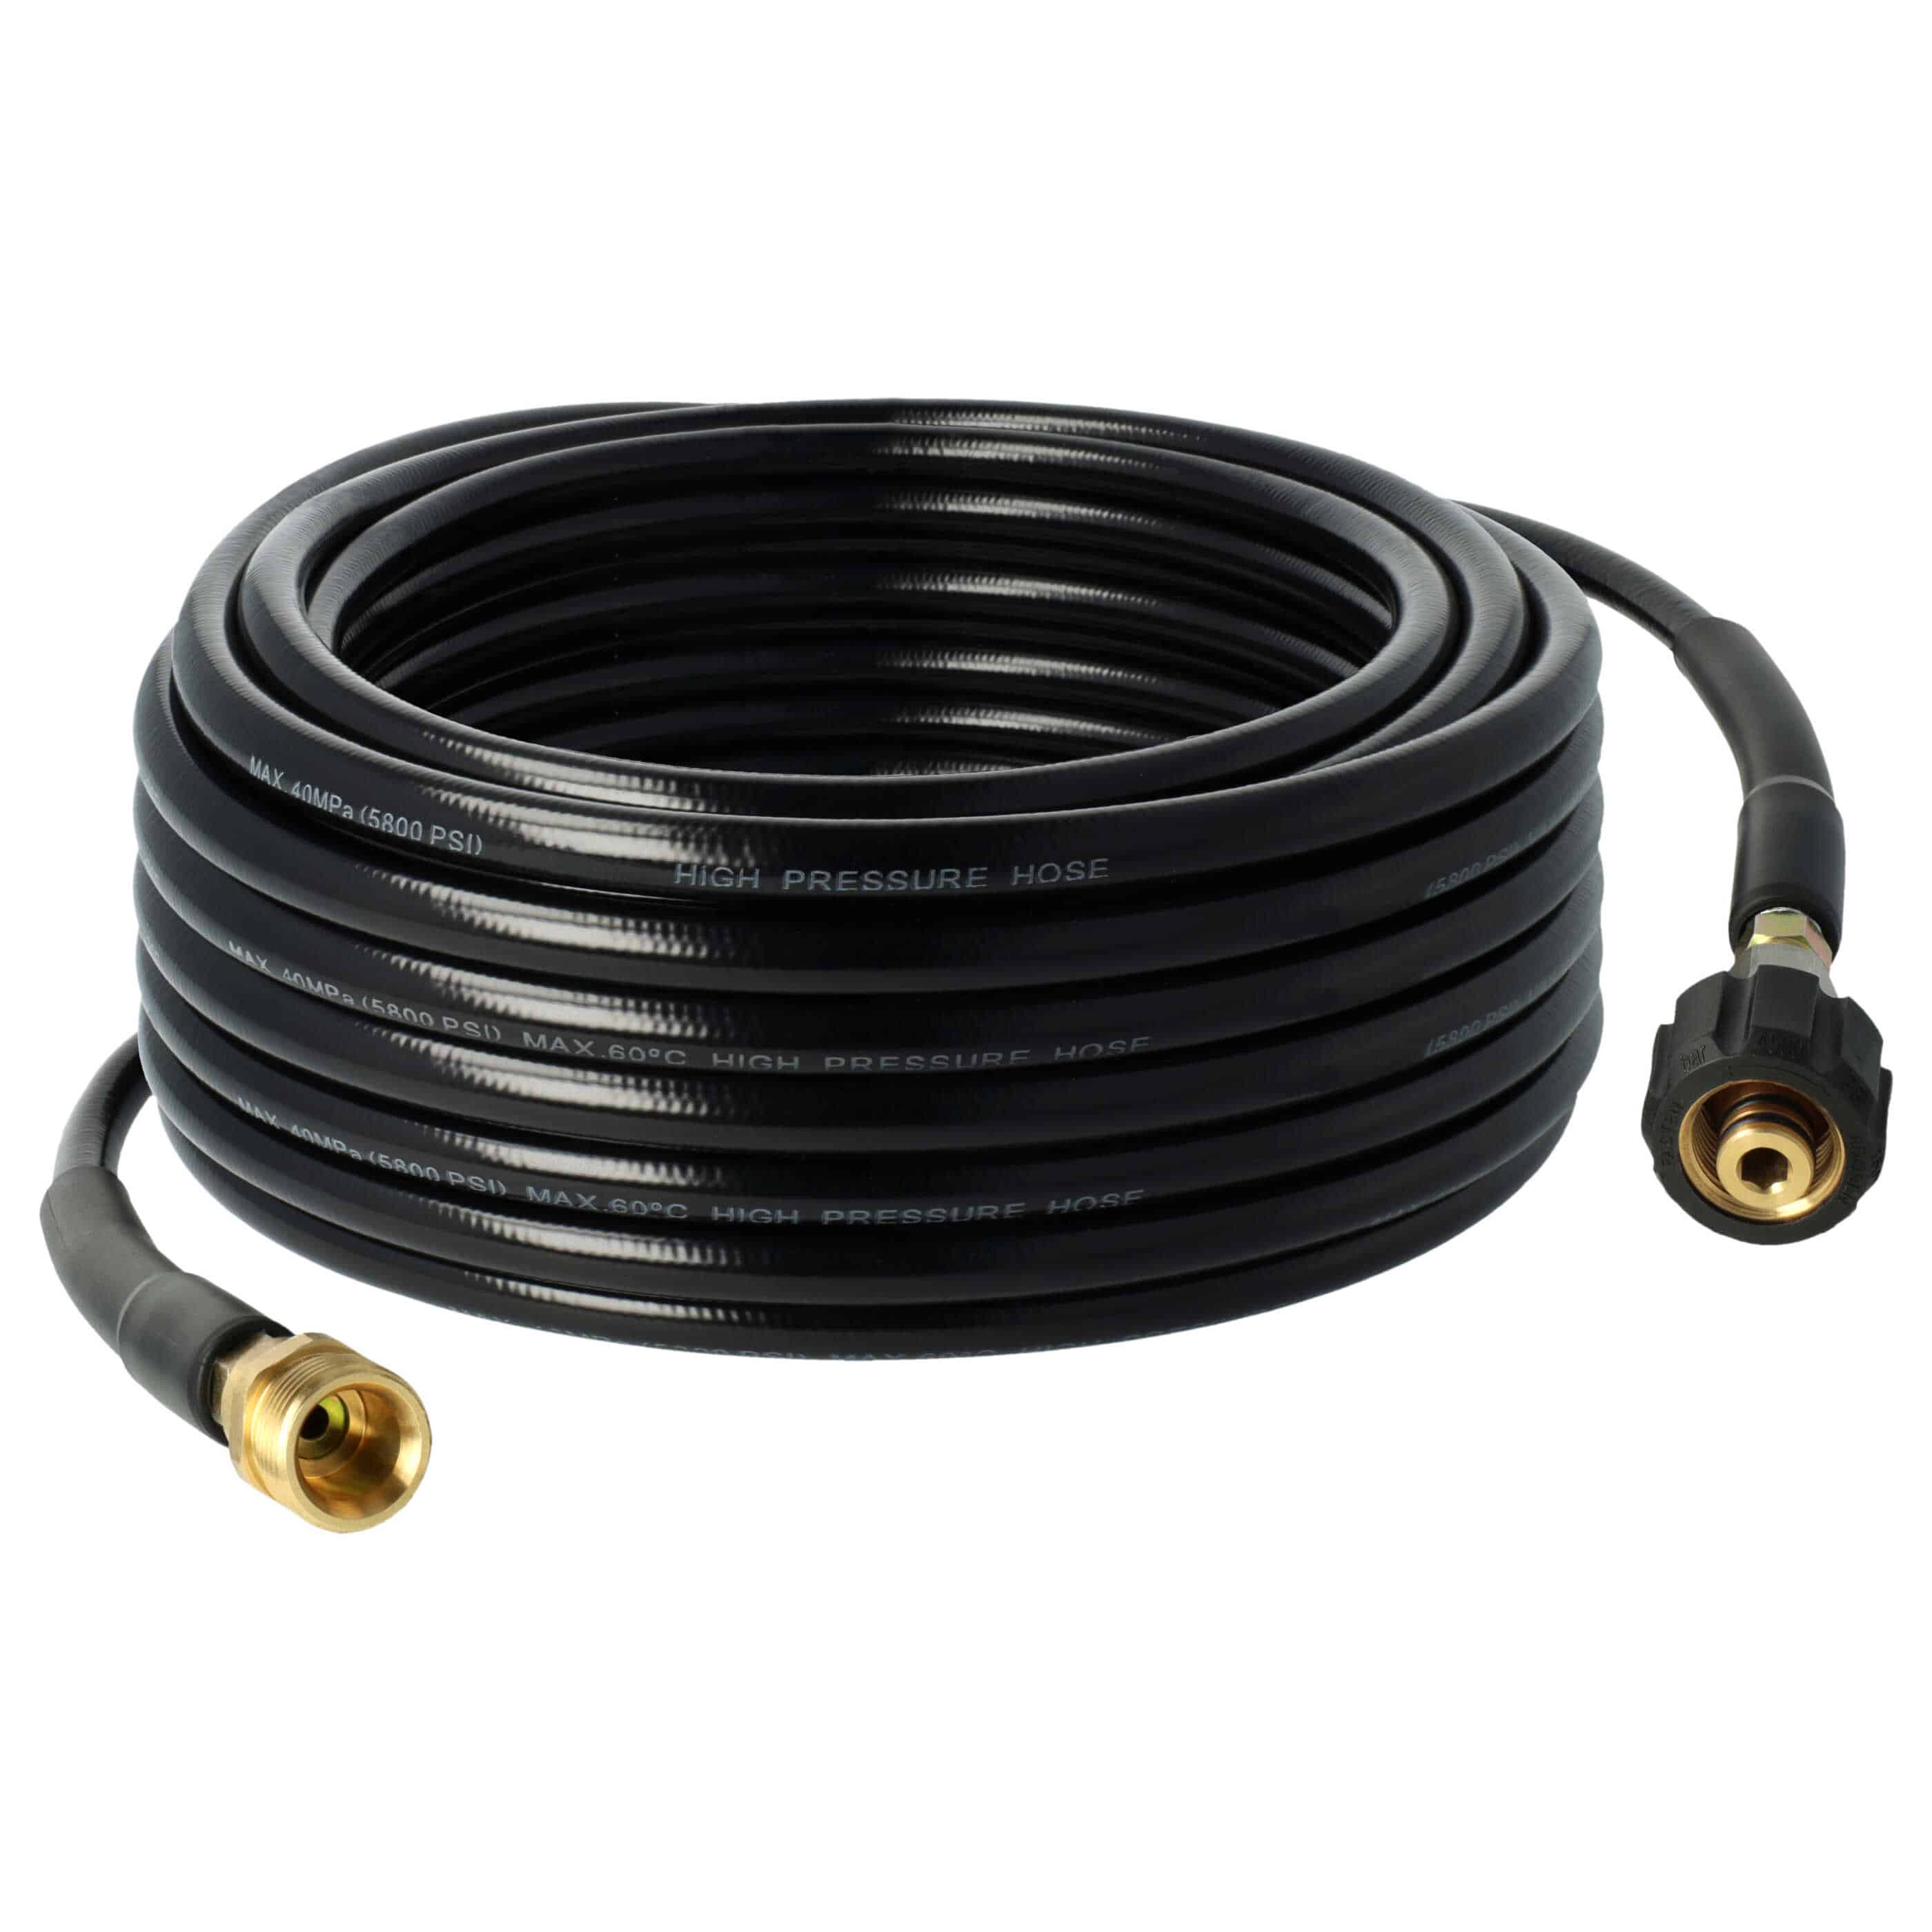 vhbw 20 m Extension Hose High-Pressure Cleaner with M22 x 1.5 Threaded Connection Black